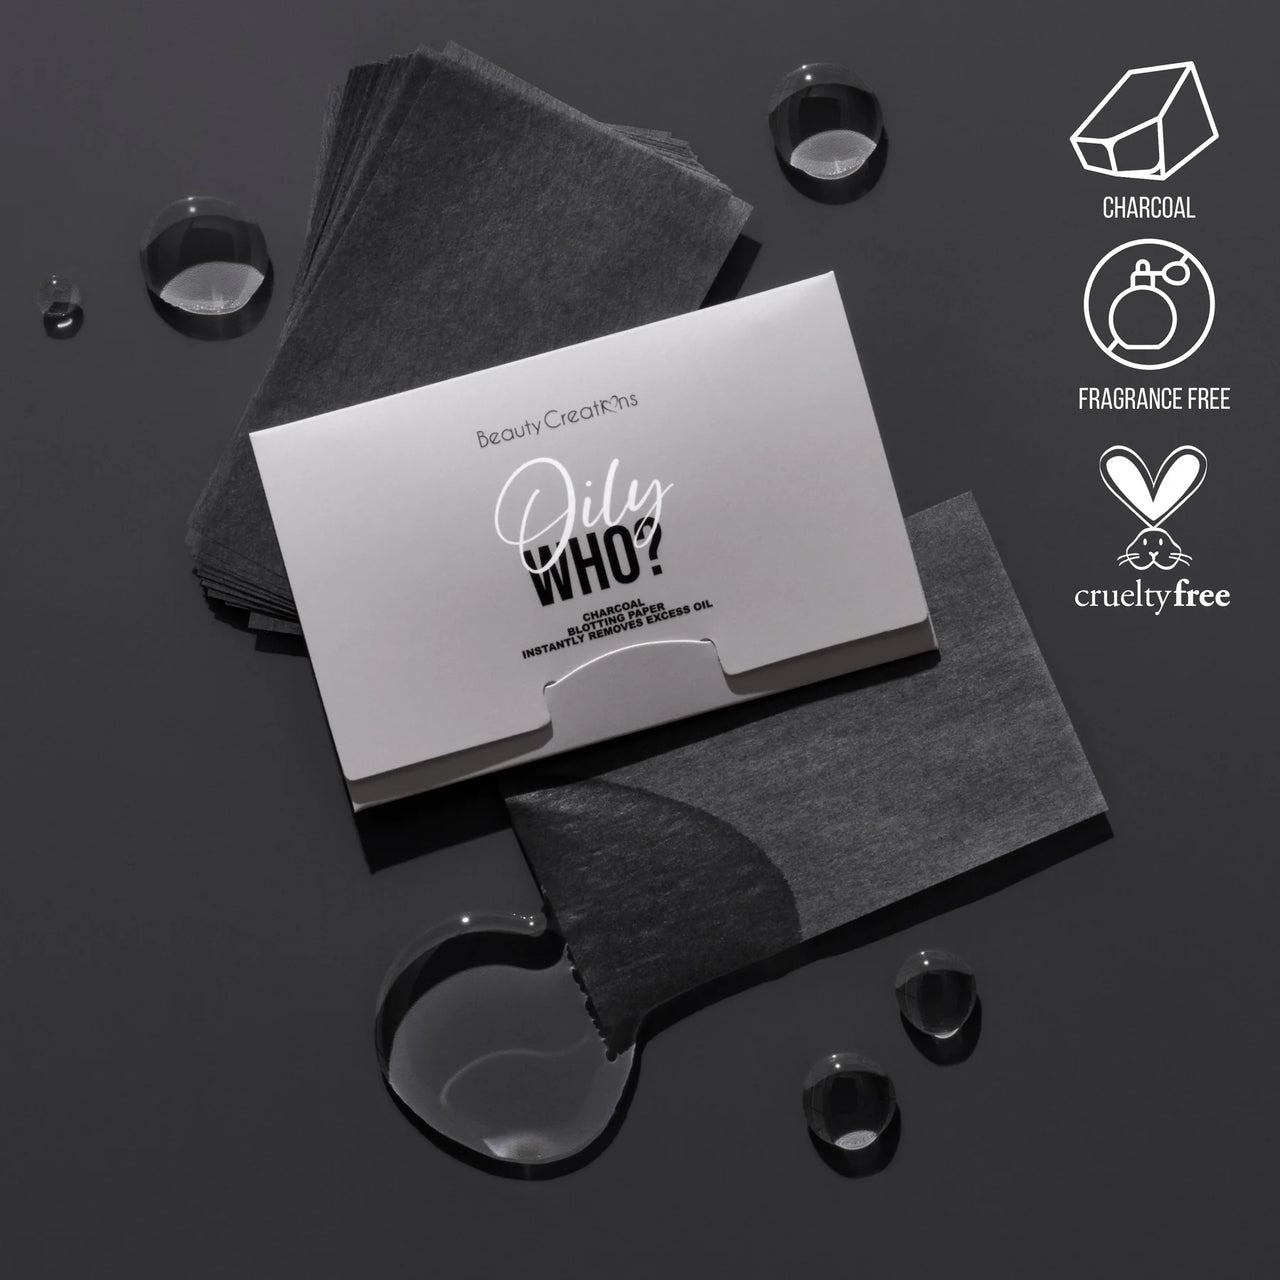 BC-OCP02 'OILY WHO?' Charcoal Blotting Paper : 2 DZ